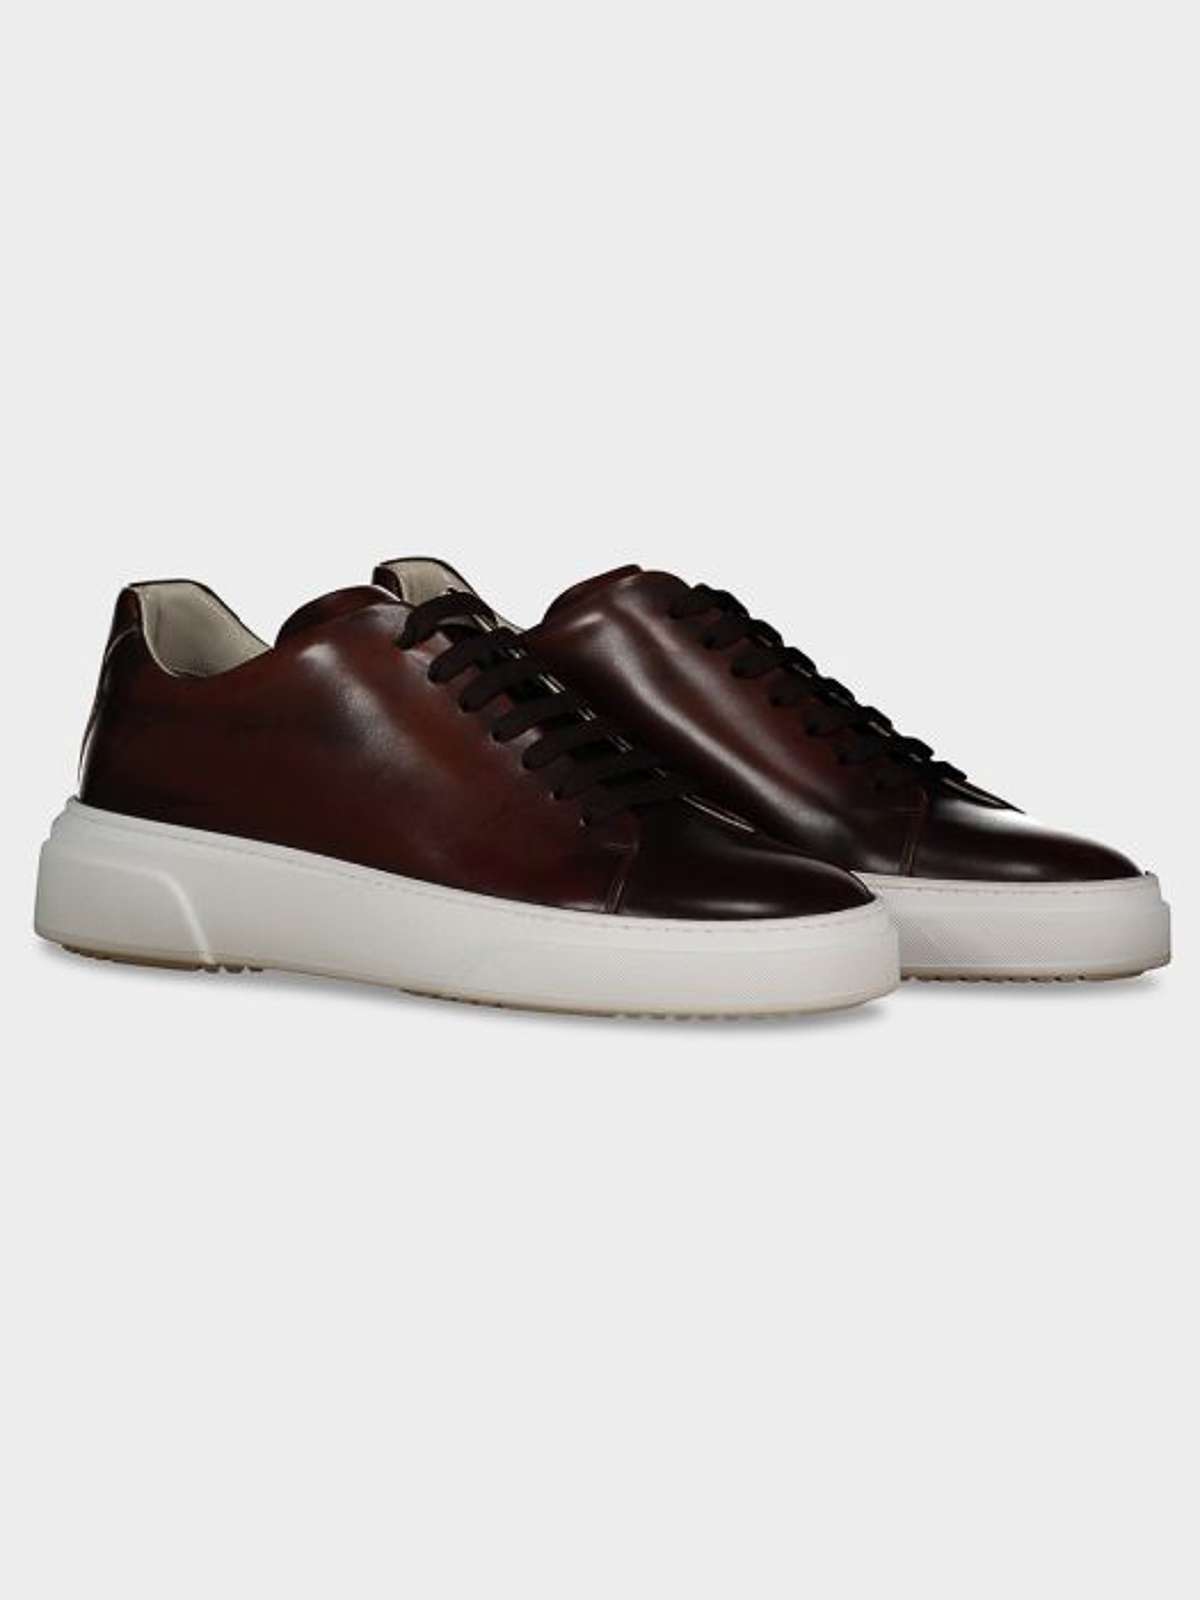 Trainers Paul & Shark - Leather shoe with s closure - 12318021492